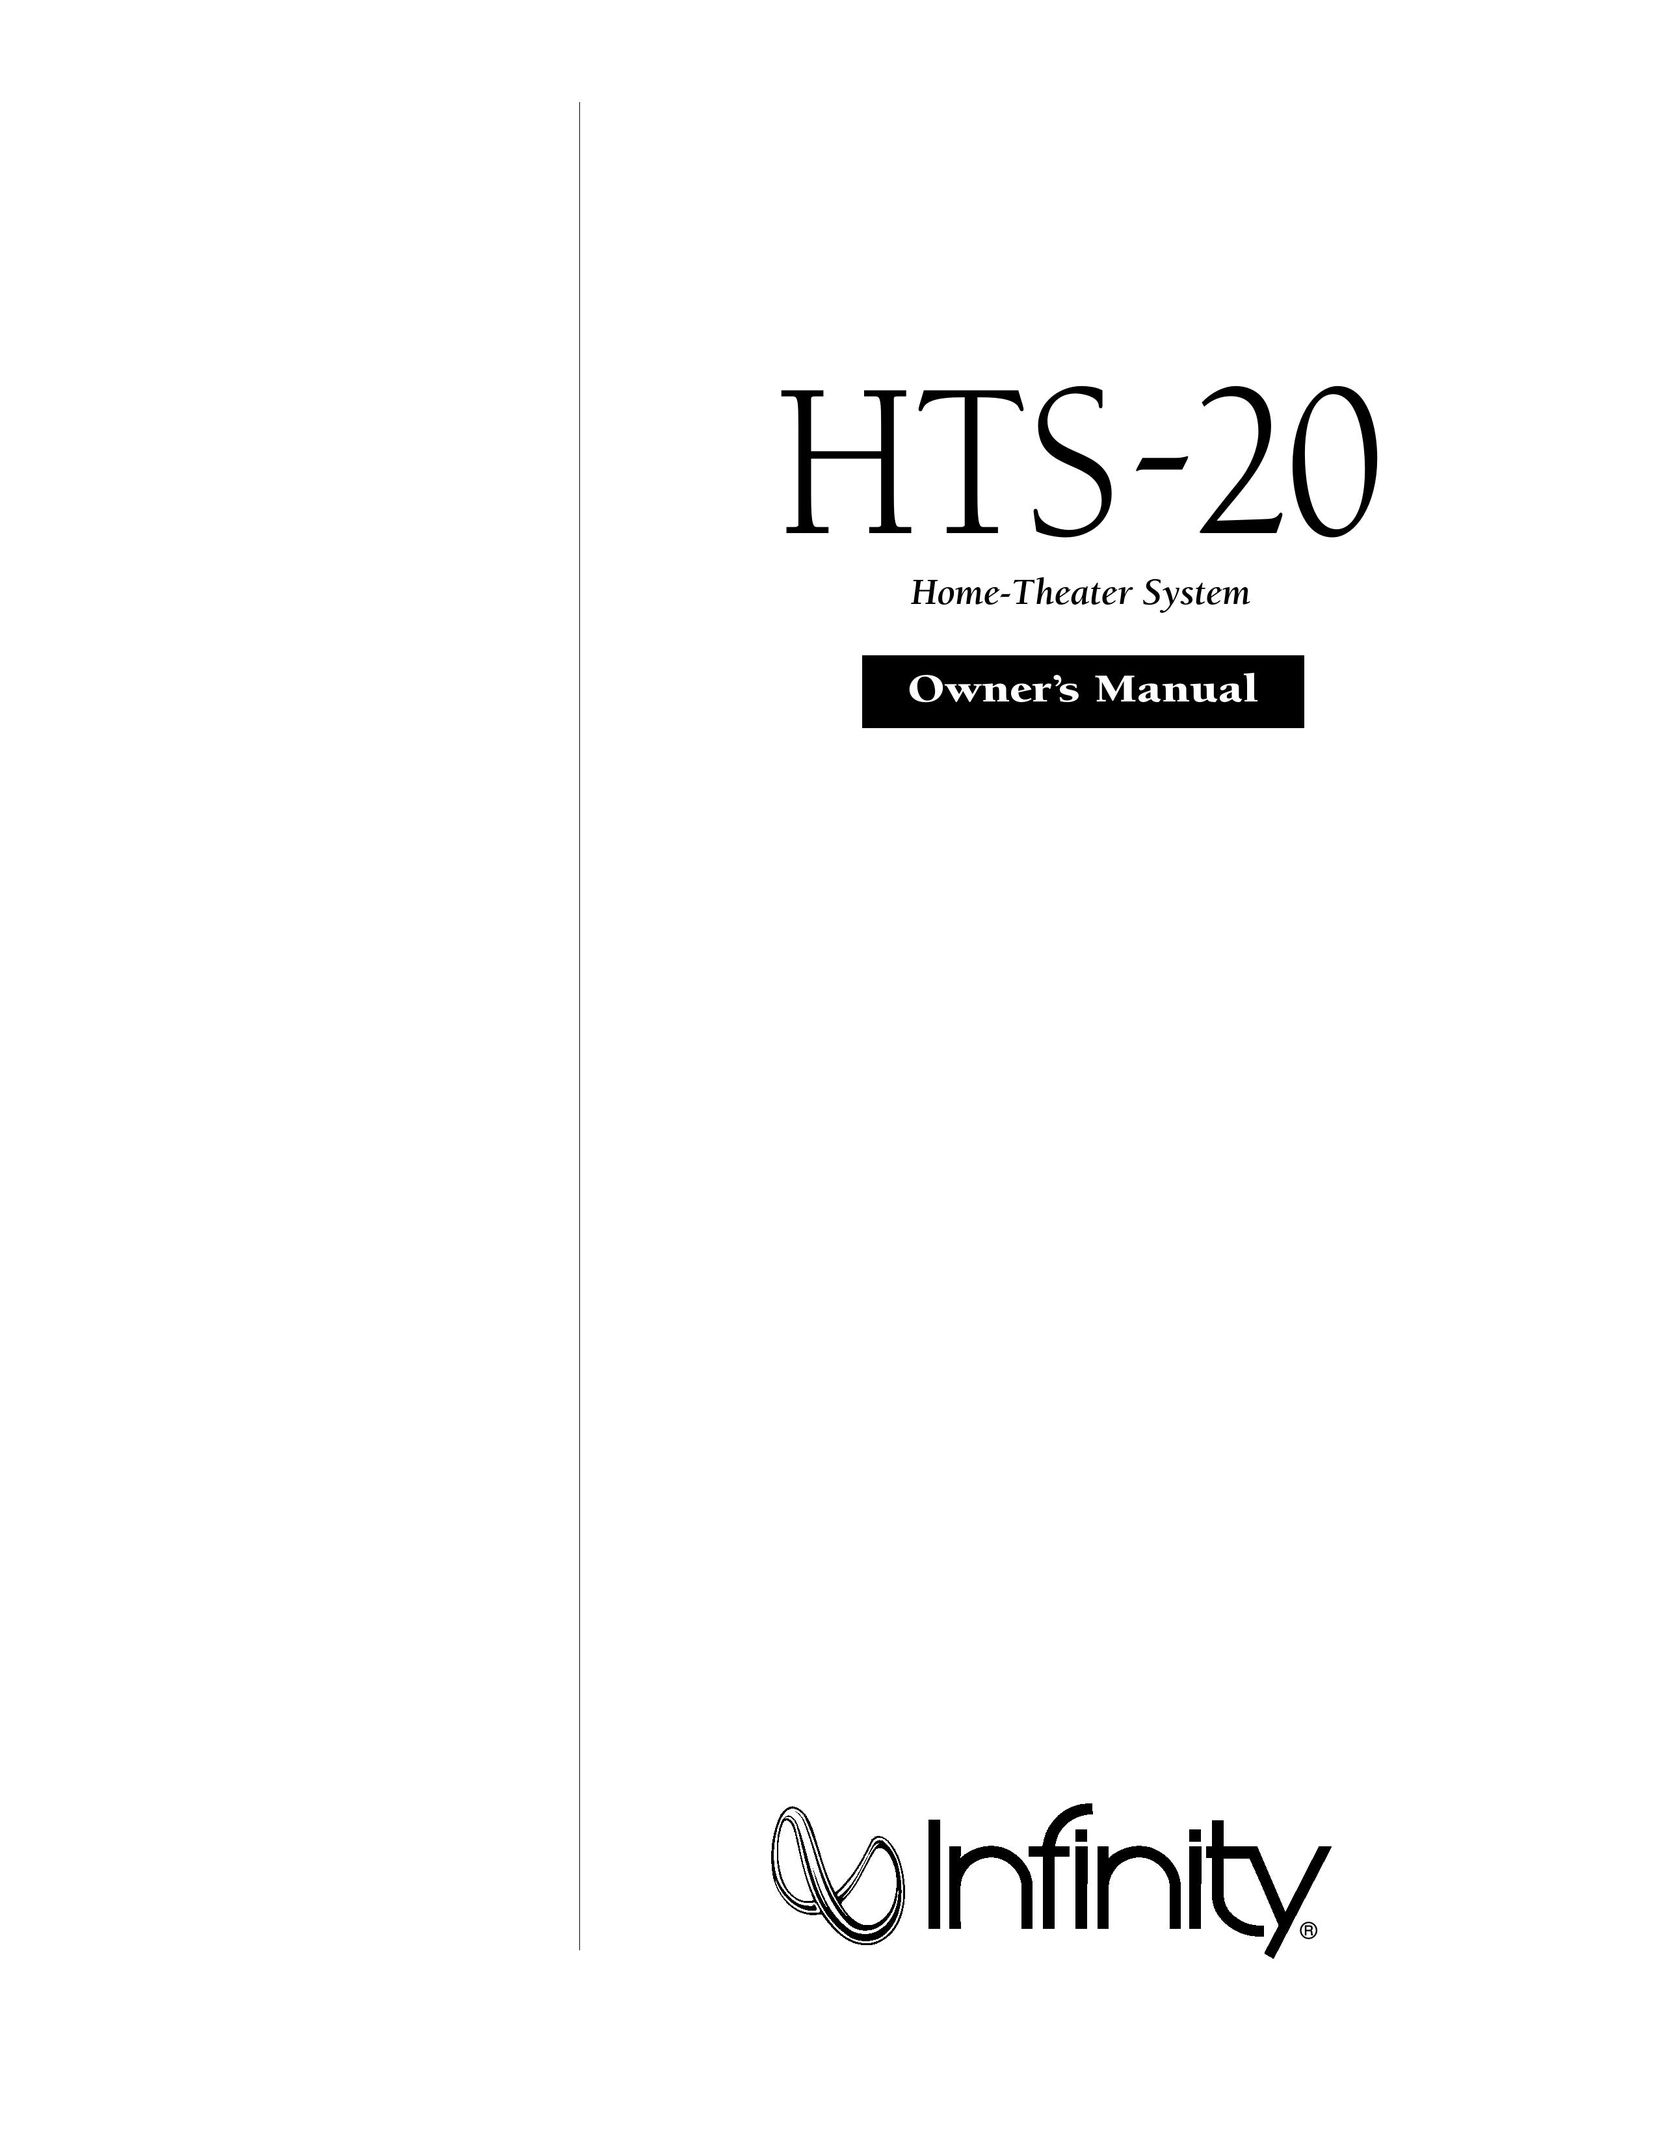 Infinity HTS-20 Home Theater System User Manual